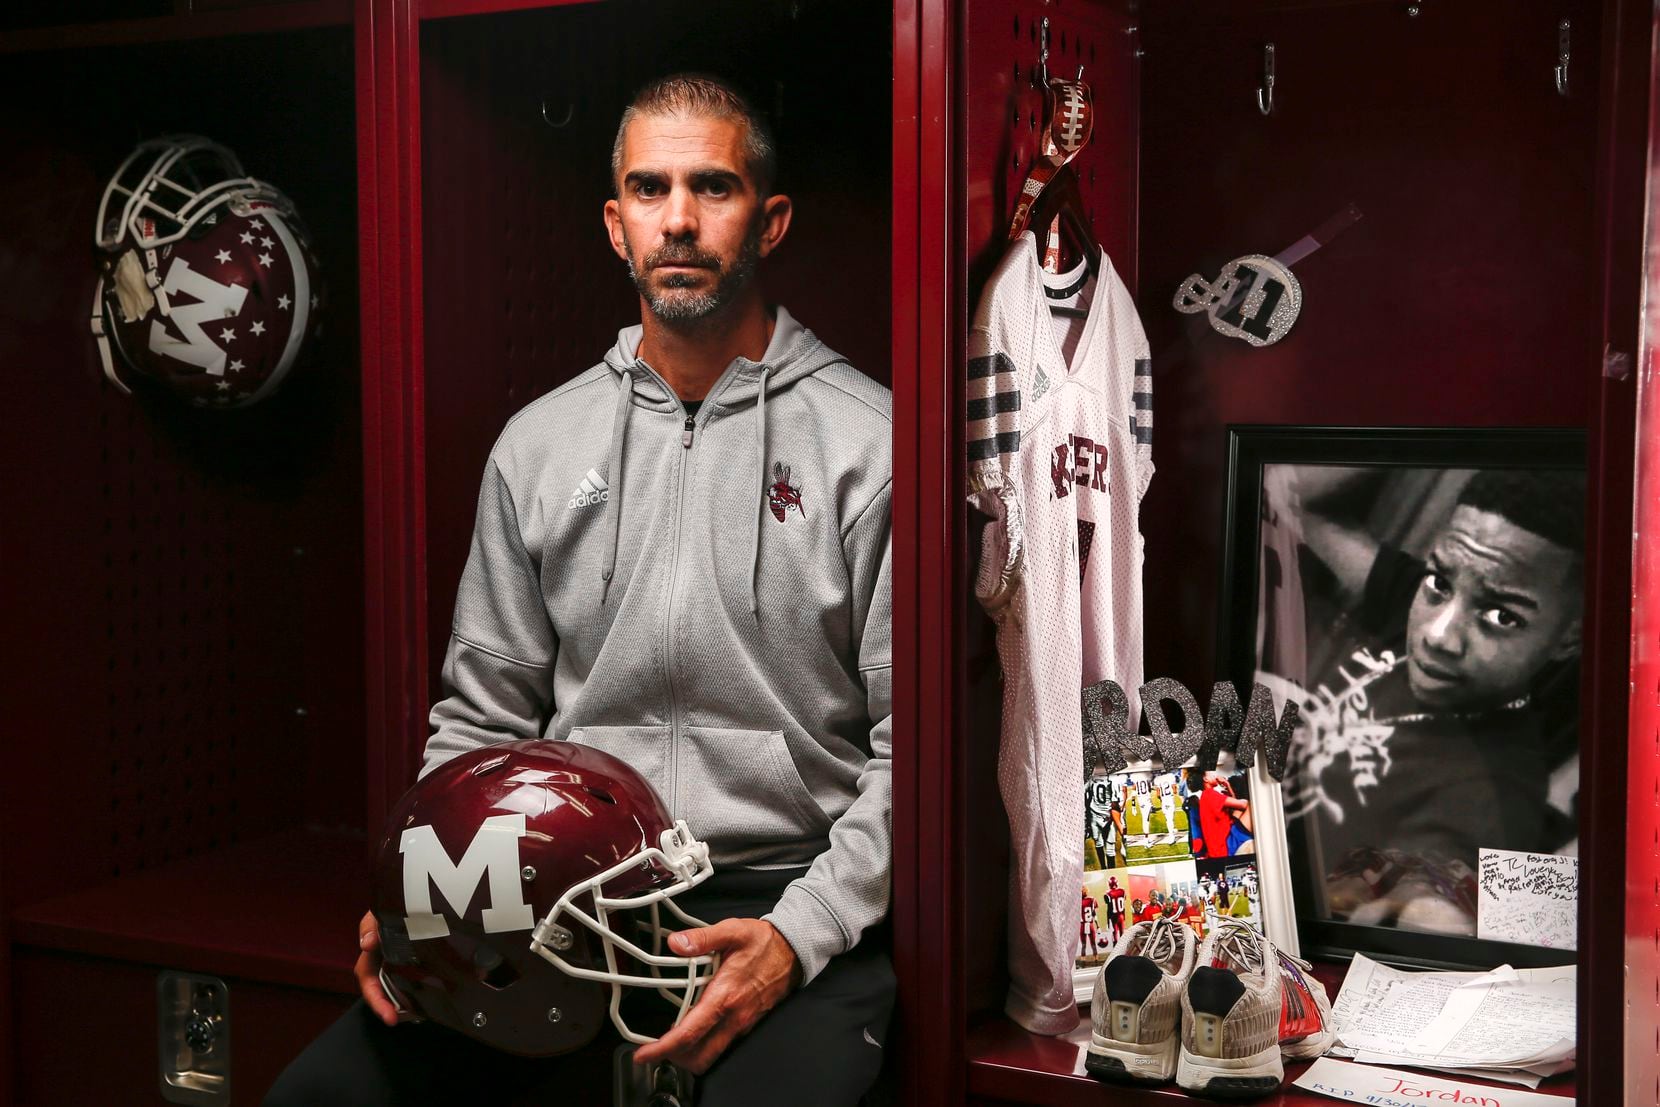 Mesquite football coach Jeff Fleener poses for a photograph next to the locker of former...